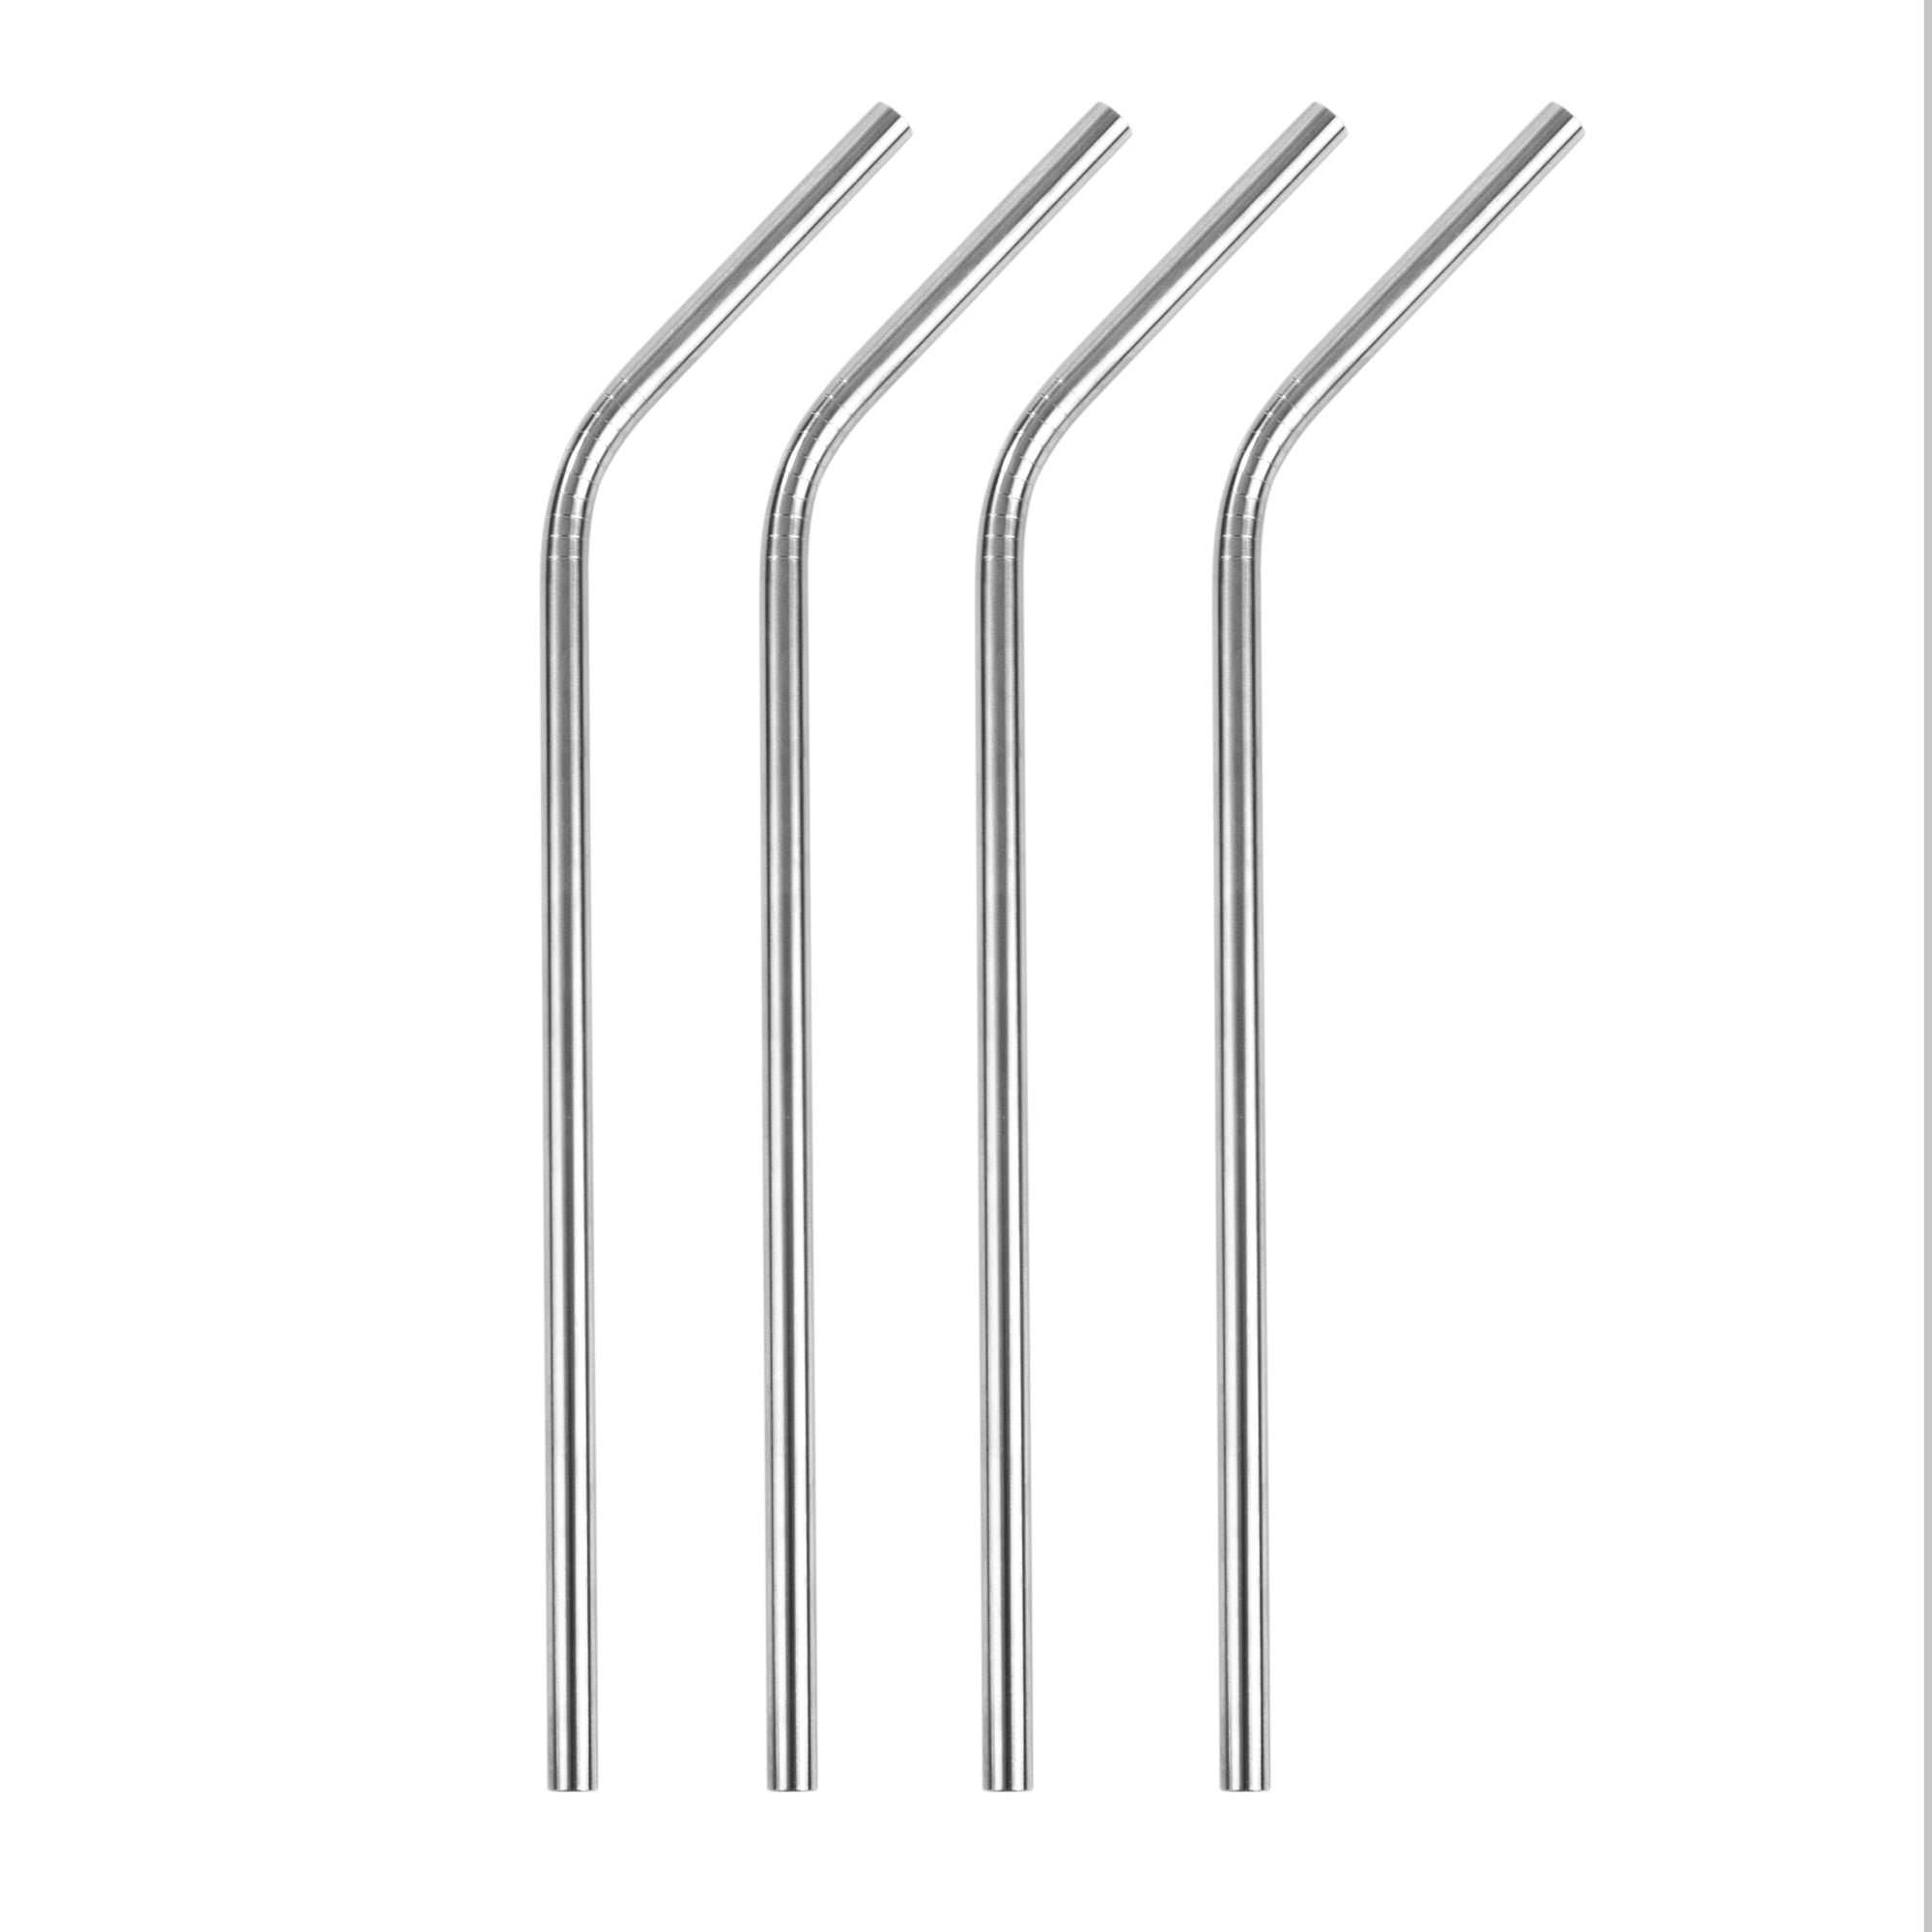 Anti Wrinkle Metal Drinking Straws  Stainless Steel Reusable Straws  For Beauty Avoid Rubbing Off Lipstick From Esw_house, $2.87